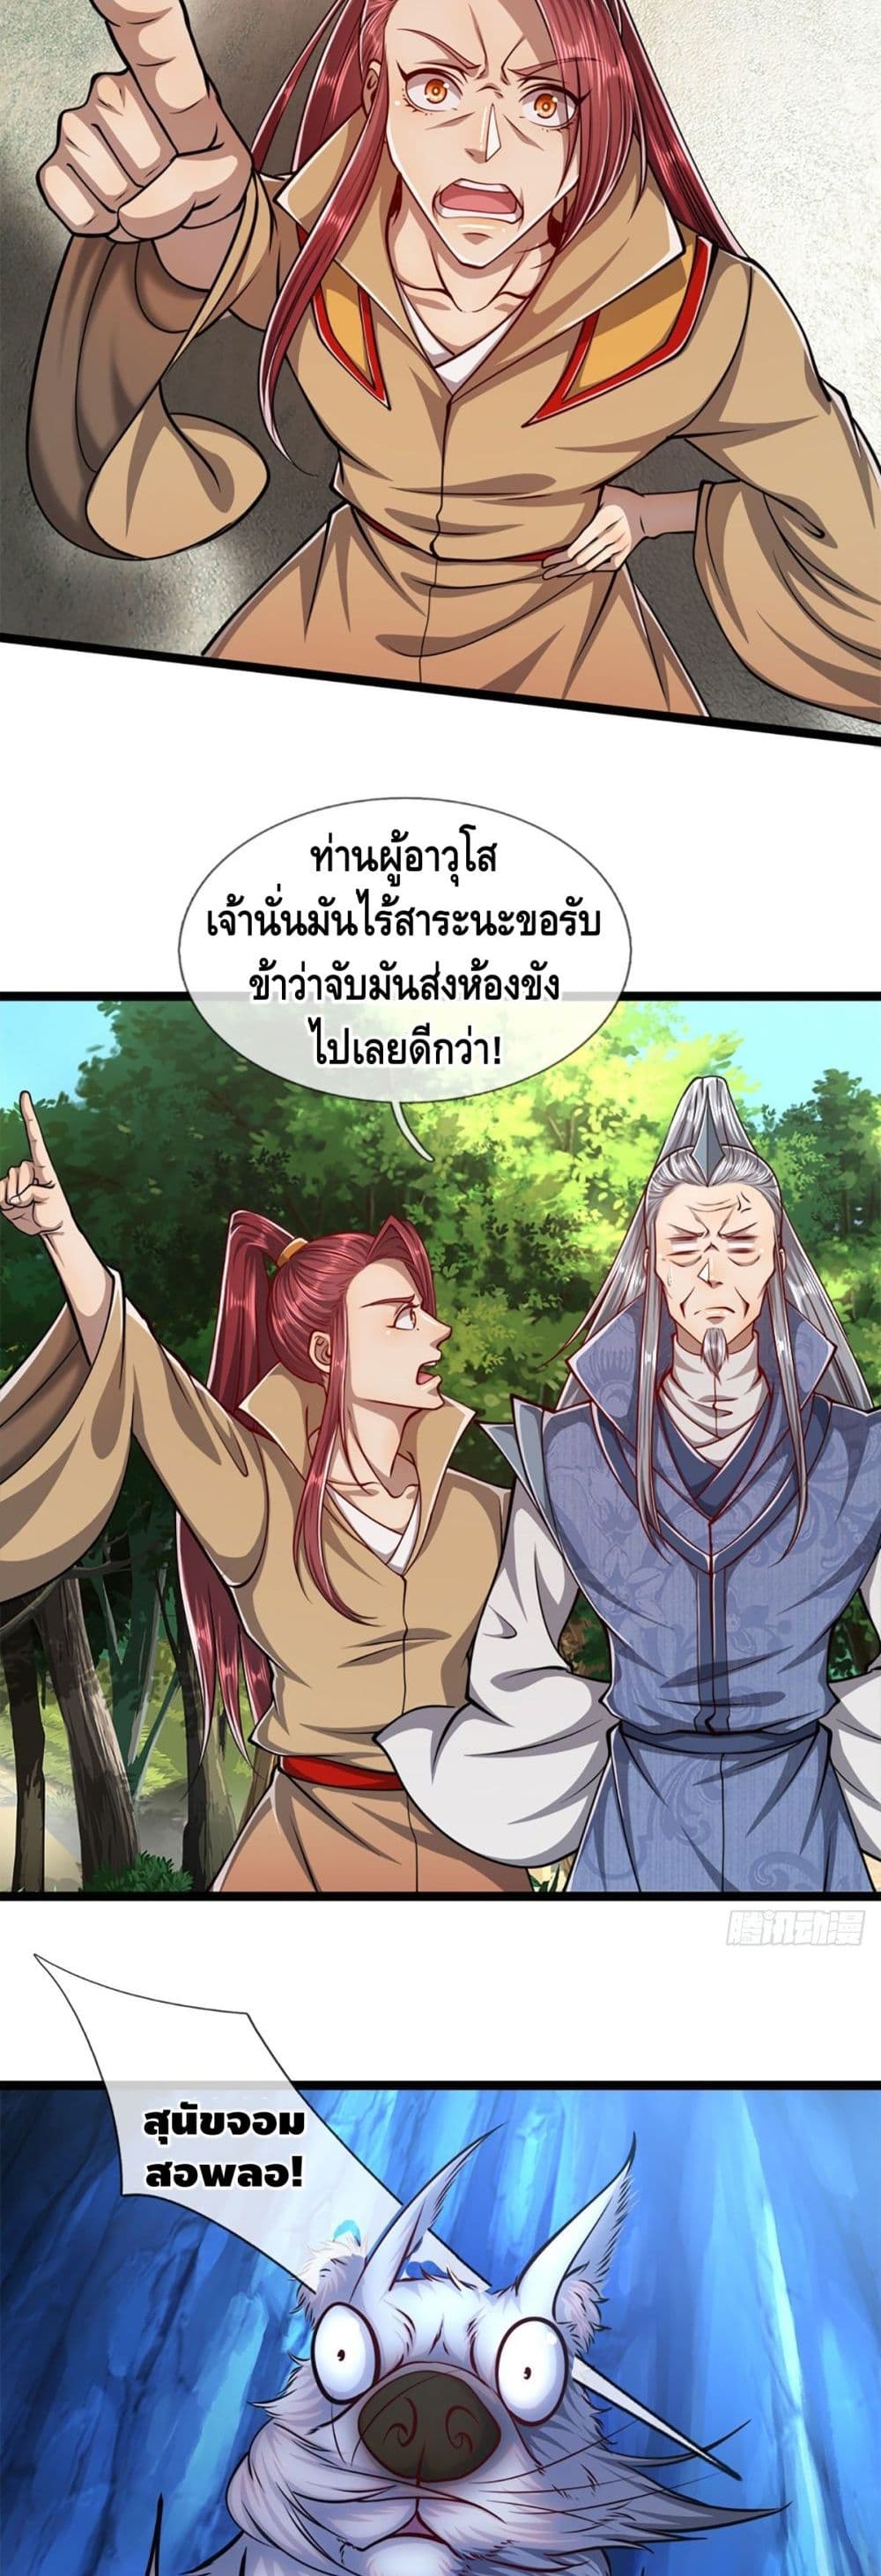 Disciples All Over the World à¸à¸­à¸à¸à¸µà¹ 30 (14)